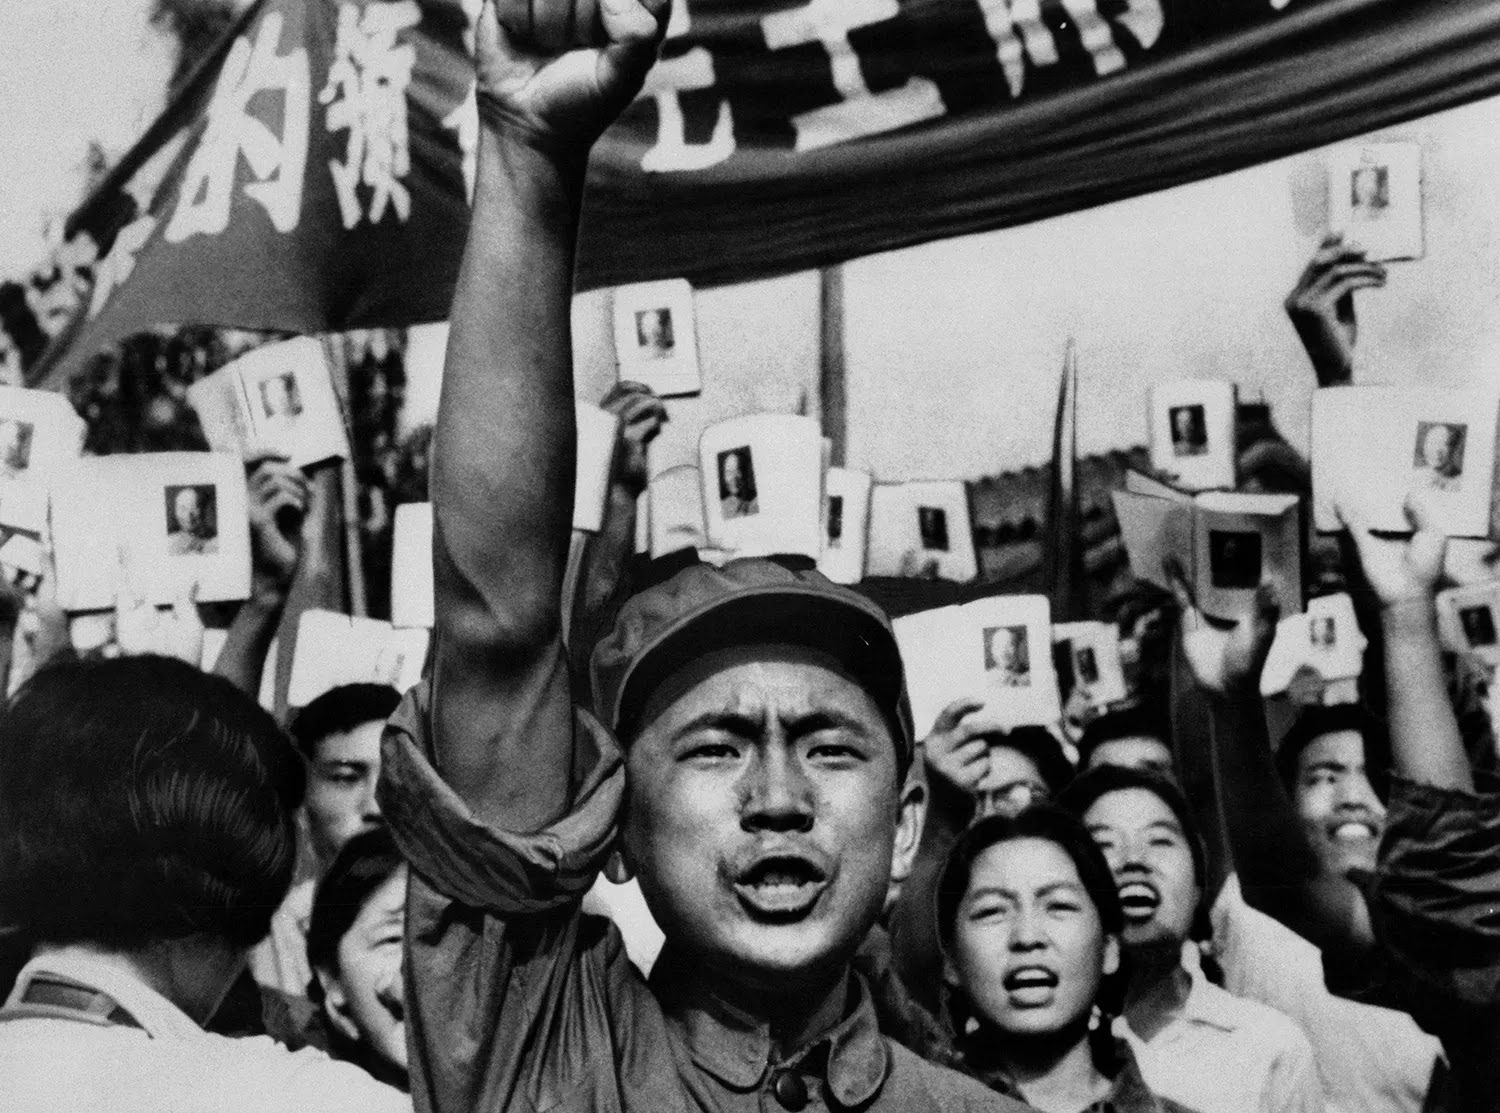 A soldier holds up his fist as a crowd of people behind him cheer holding up images in books and on pieces of paper under a banner with Chinese characters on it.